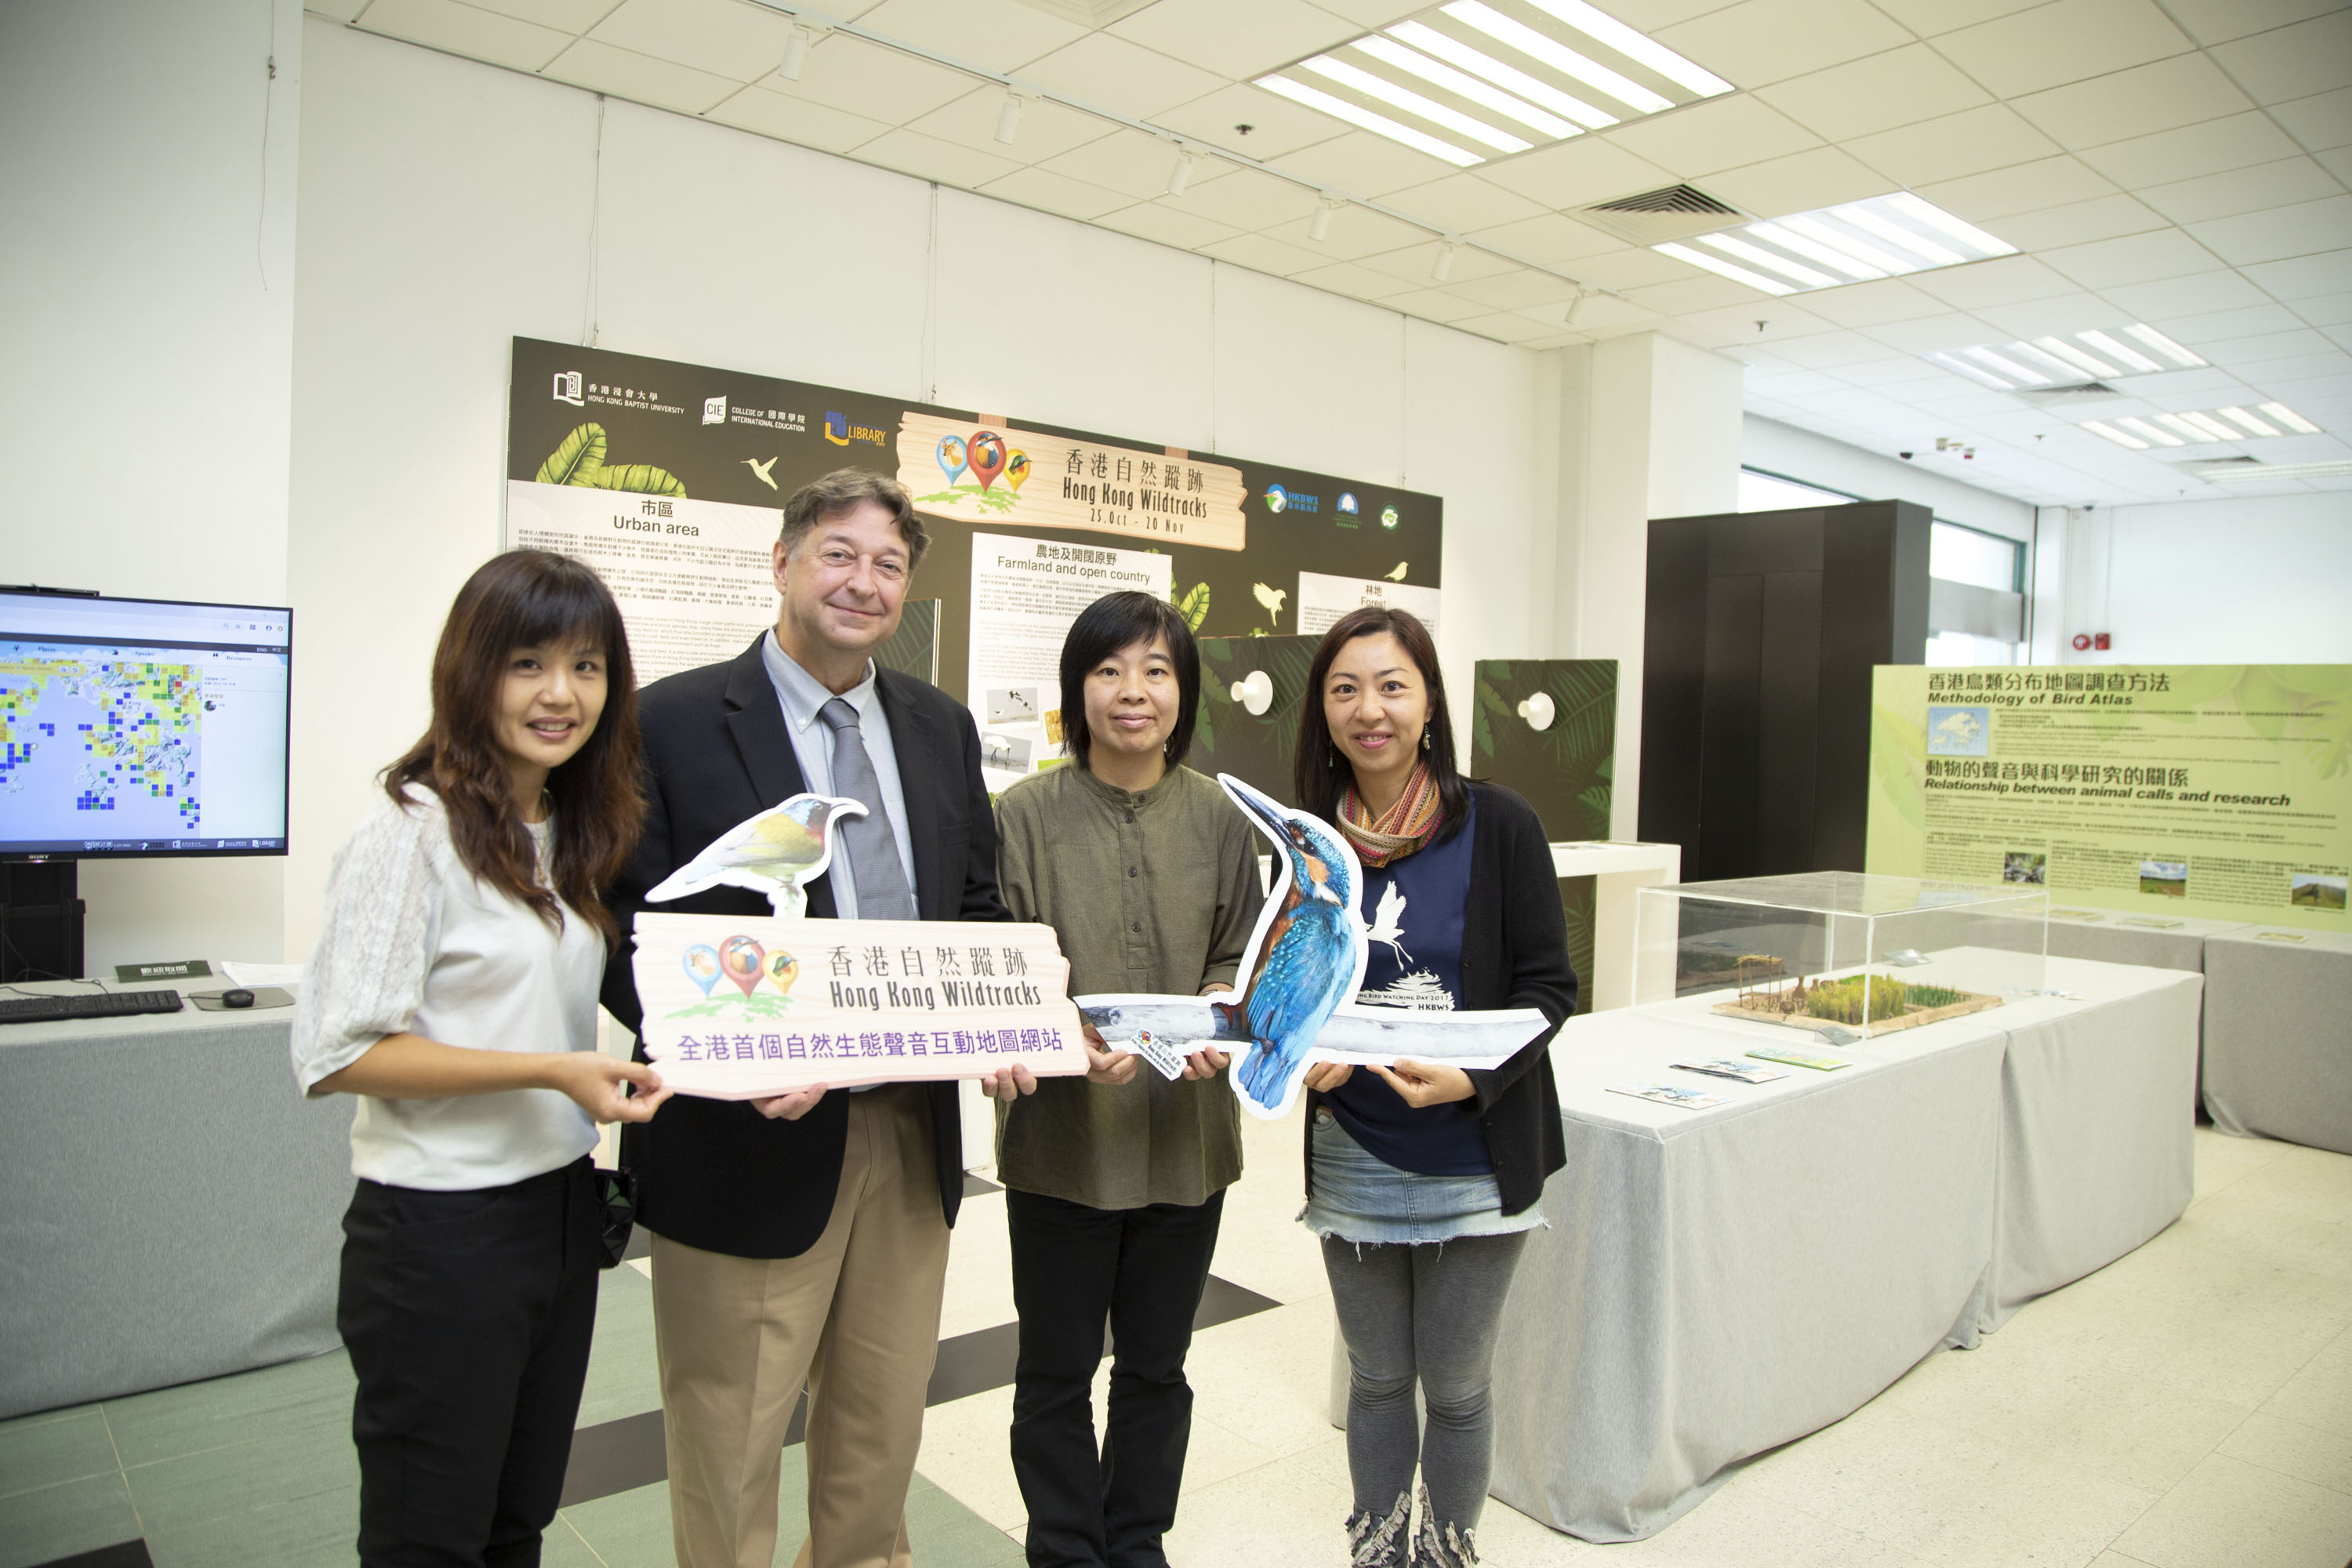 Dr Karen Woo (Lecturer, HKBU CIE) (2nd right), Mr Kendall Crilly (University Librarian, HKBU) (2nd left), Ms Rebekah Wong (Head of Digital and Multimedia Services Section, University Library, HKBU) (1st left) and Ms Christina Chan (Assistant Manager of Education, Art Development and Communications, HKBWS) (1st right) officiated at the opening ceremony of the website.